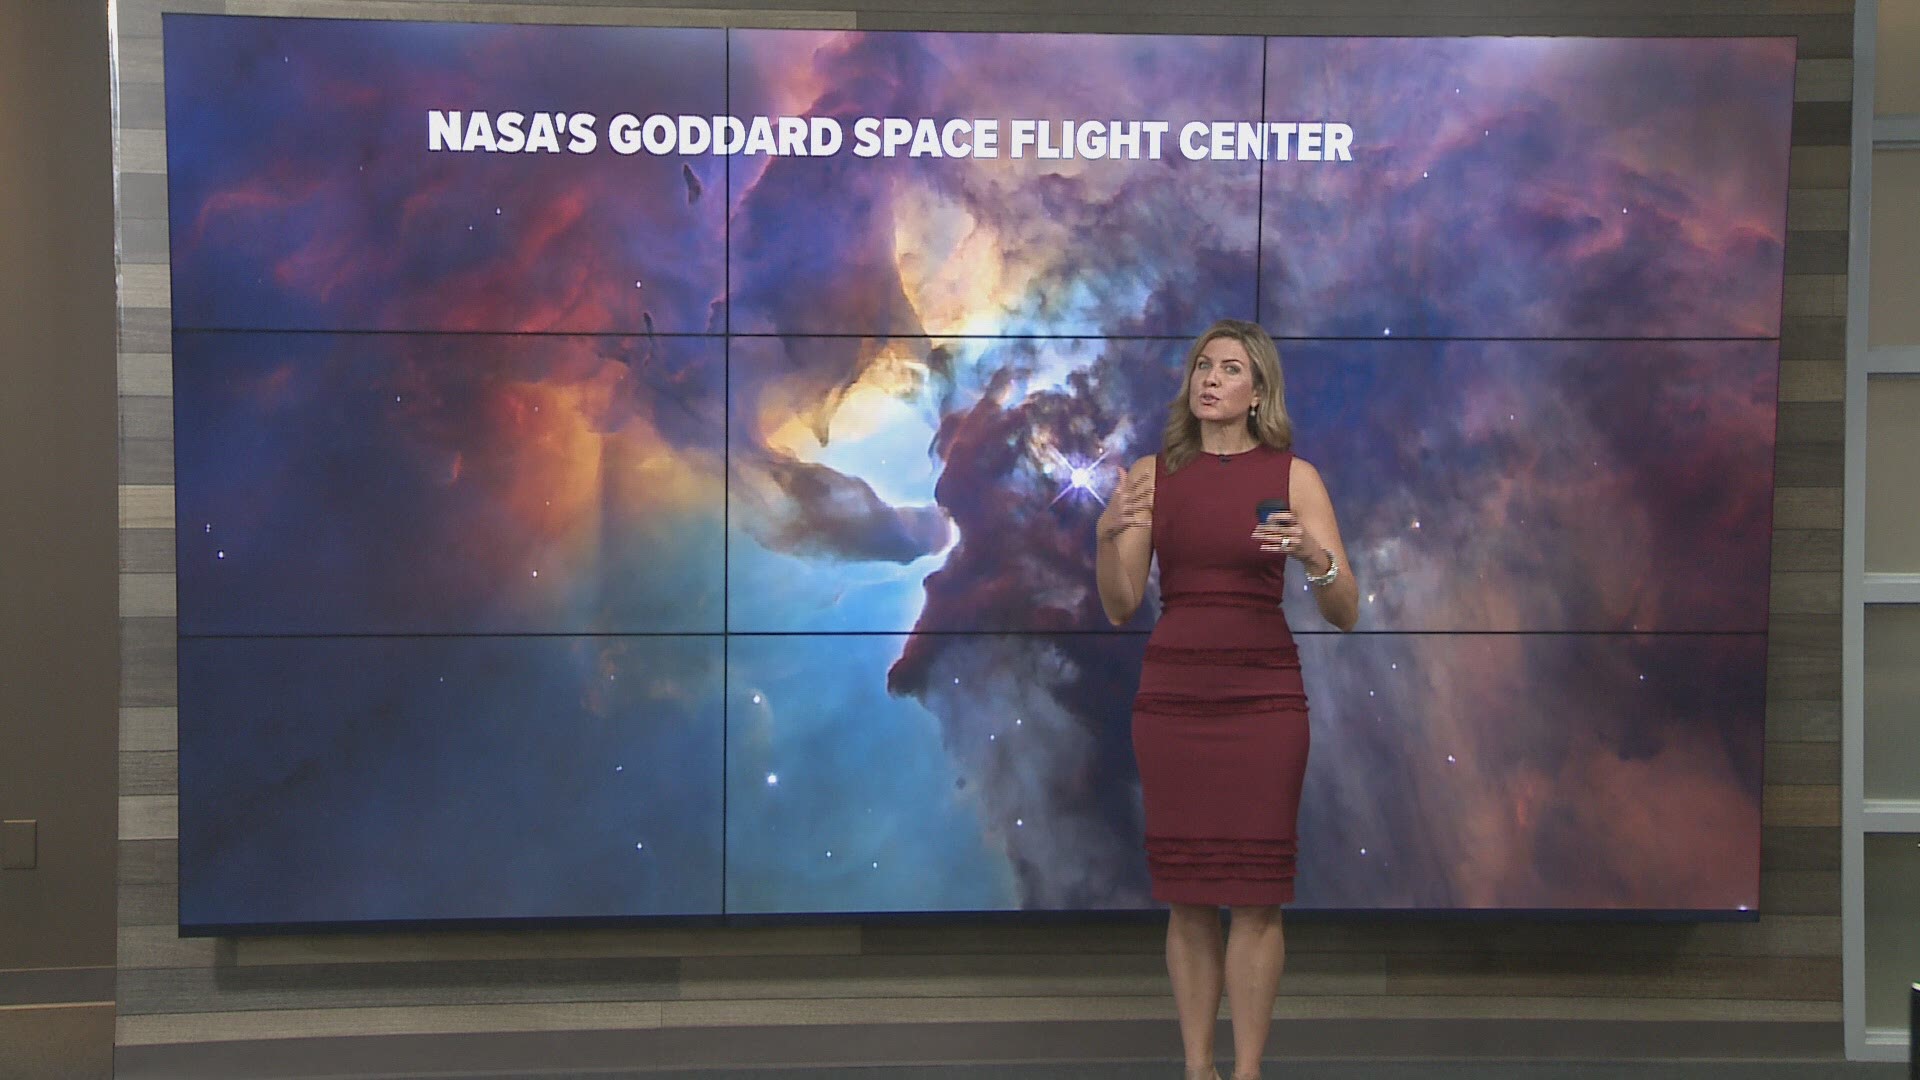 Hubble Telescope: ABC10's Meteorologist Monica Woods talks about the Hubble Telescope which celebrates its 28th birthday and in spirit of celebration, NASA is releasing new images from the Lagoon Nebula. (April 20, 2018)